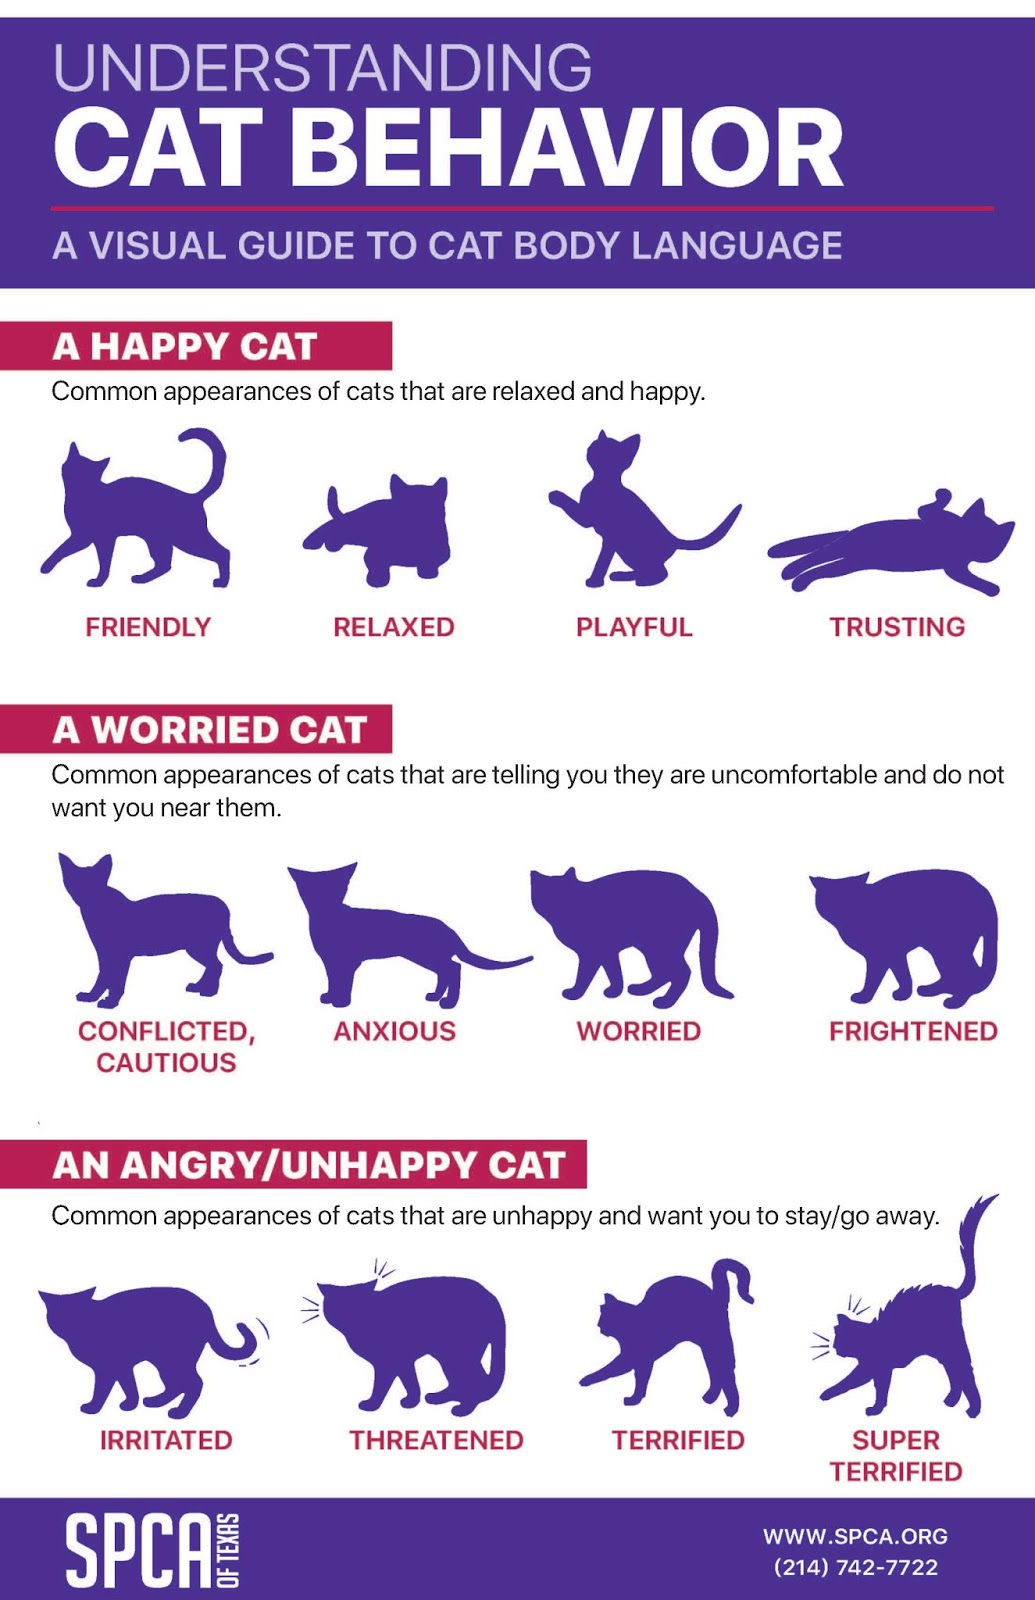 What Your Cat's Behaviors, Body Language, and Sounds Mean - PetHelpful